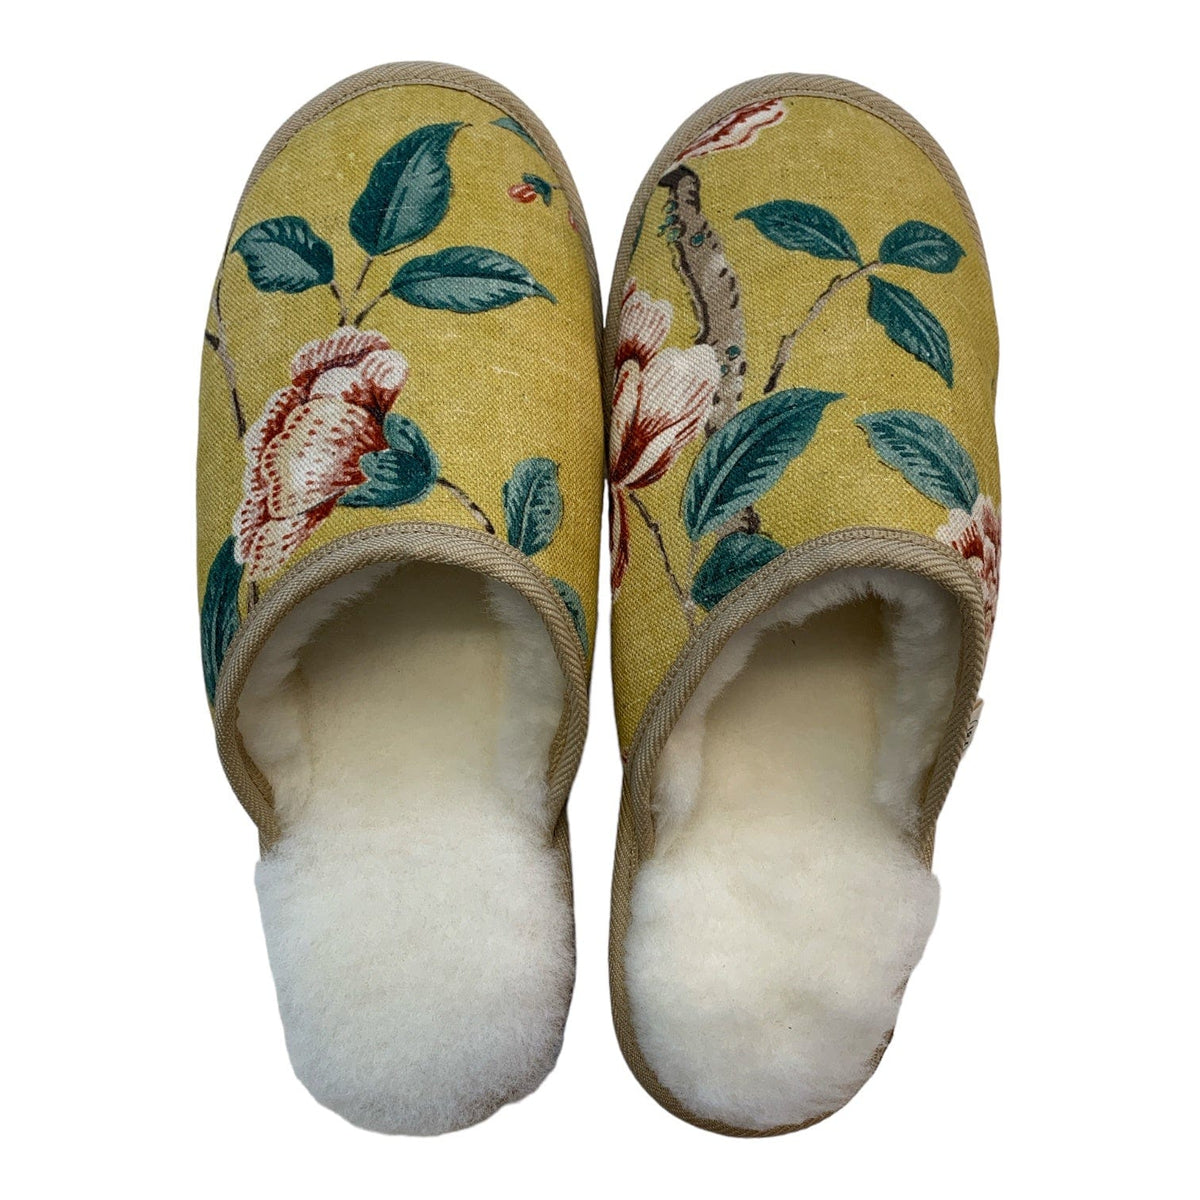 Mustard Florals Large White Slippers.jpg